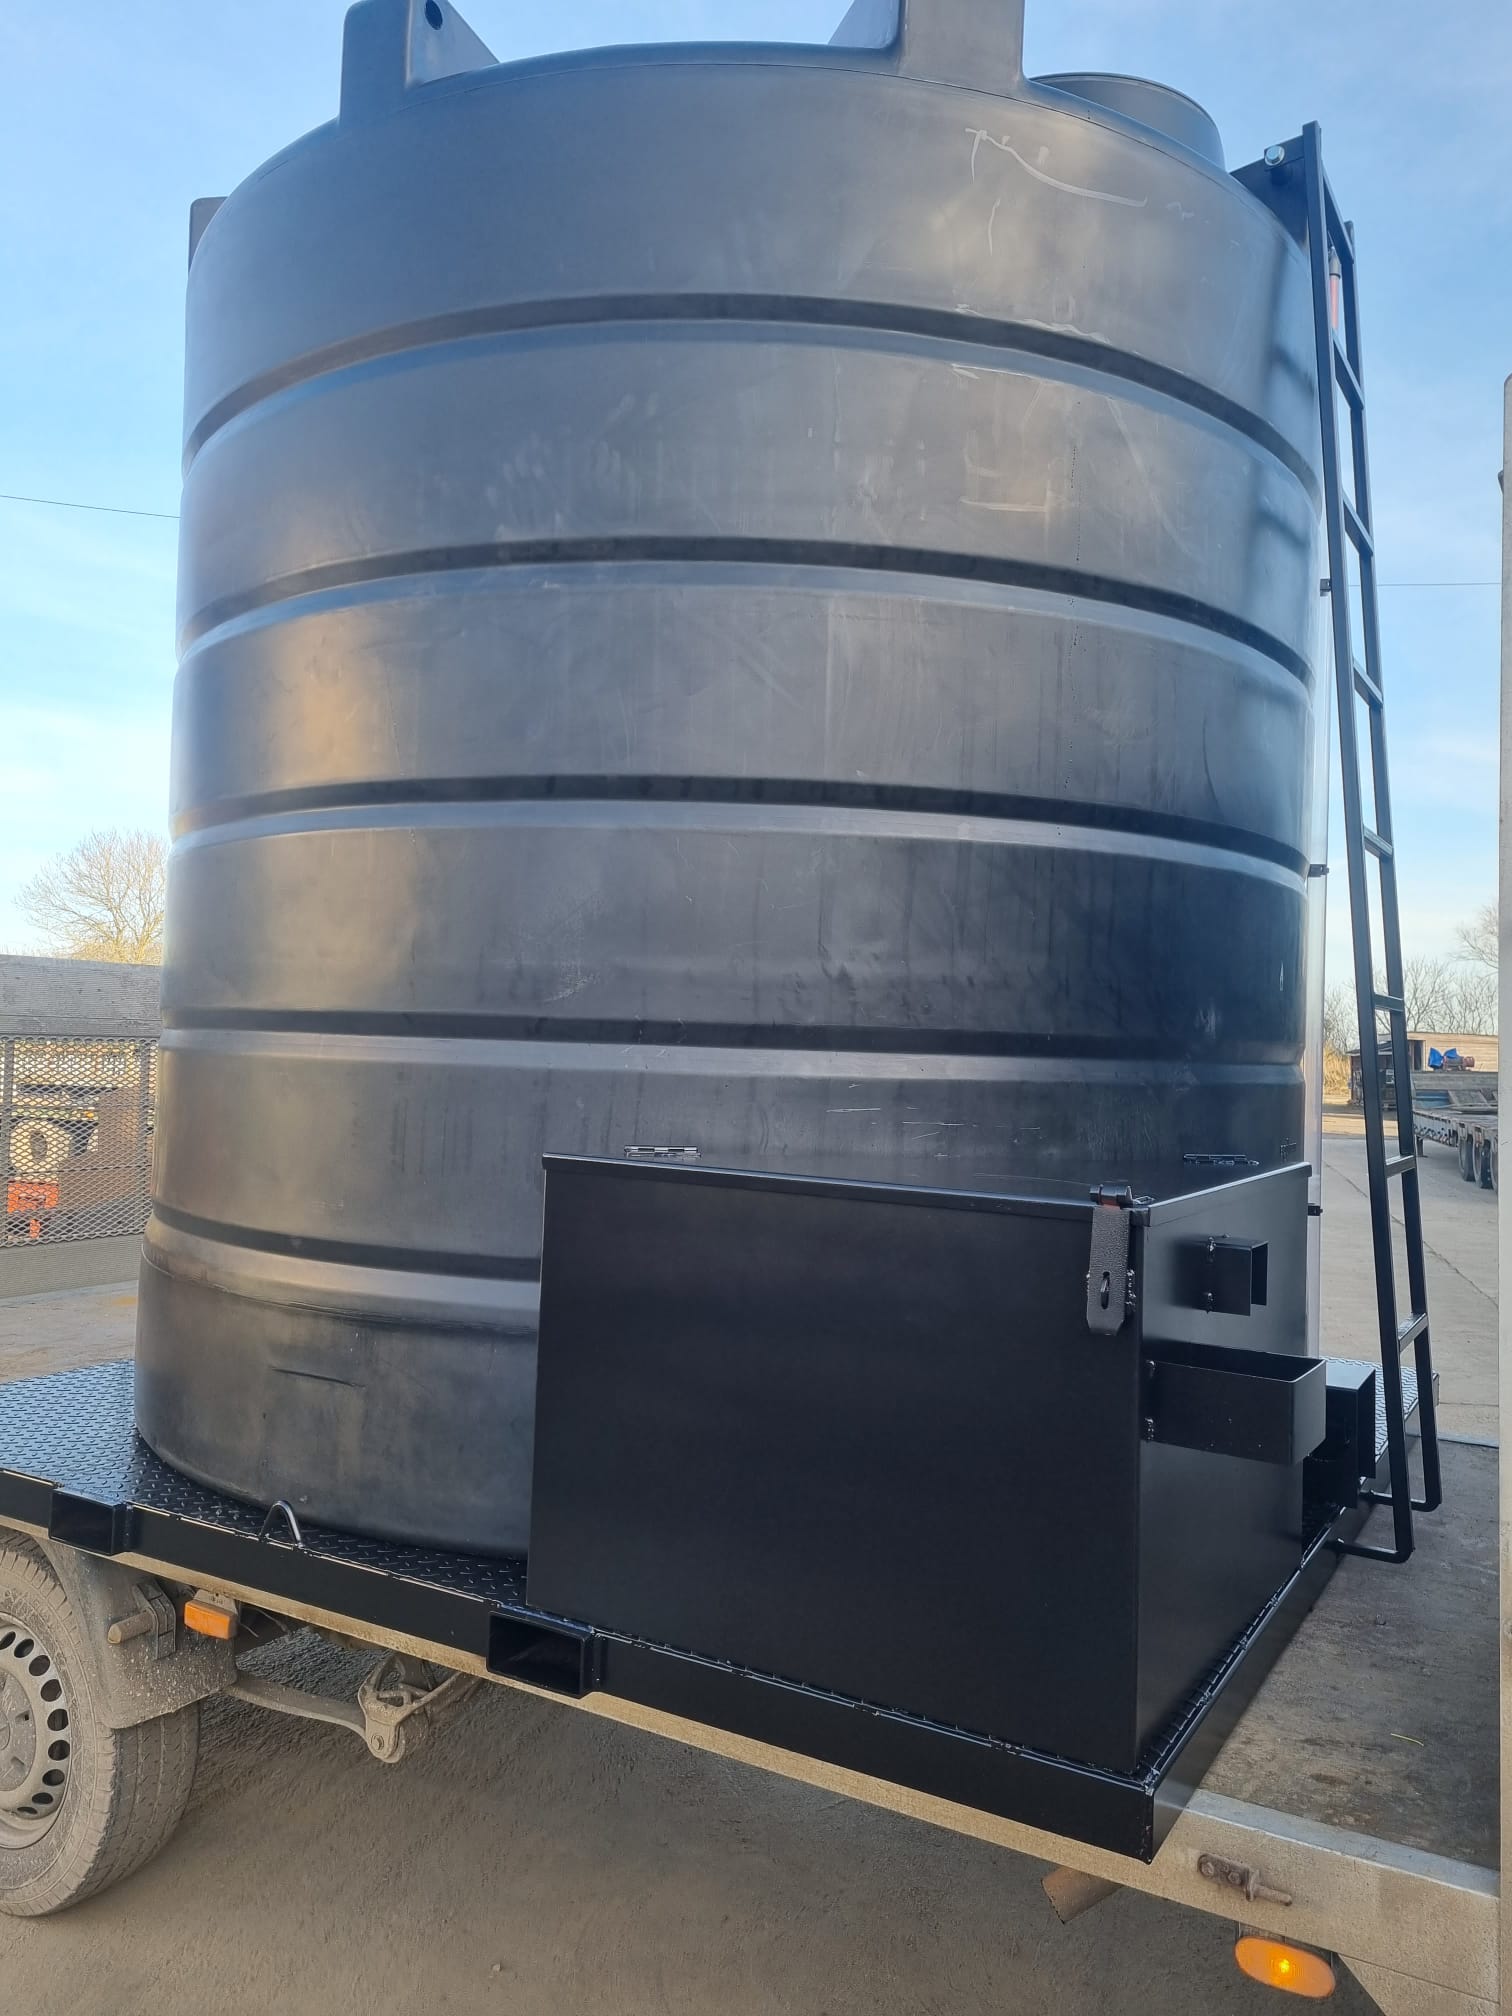 Affordable 10,000ltr Water Tank, With On Demand Pump To Hire In Nottinghamshire